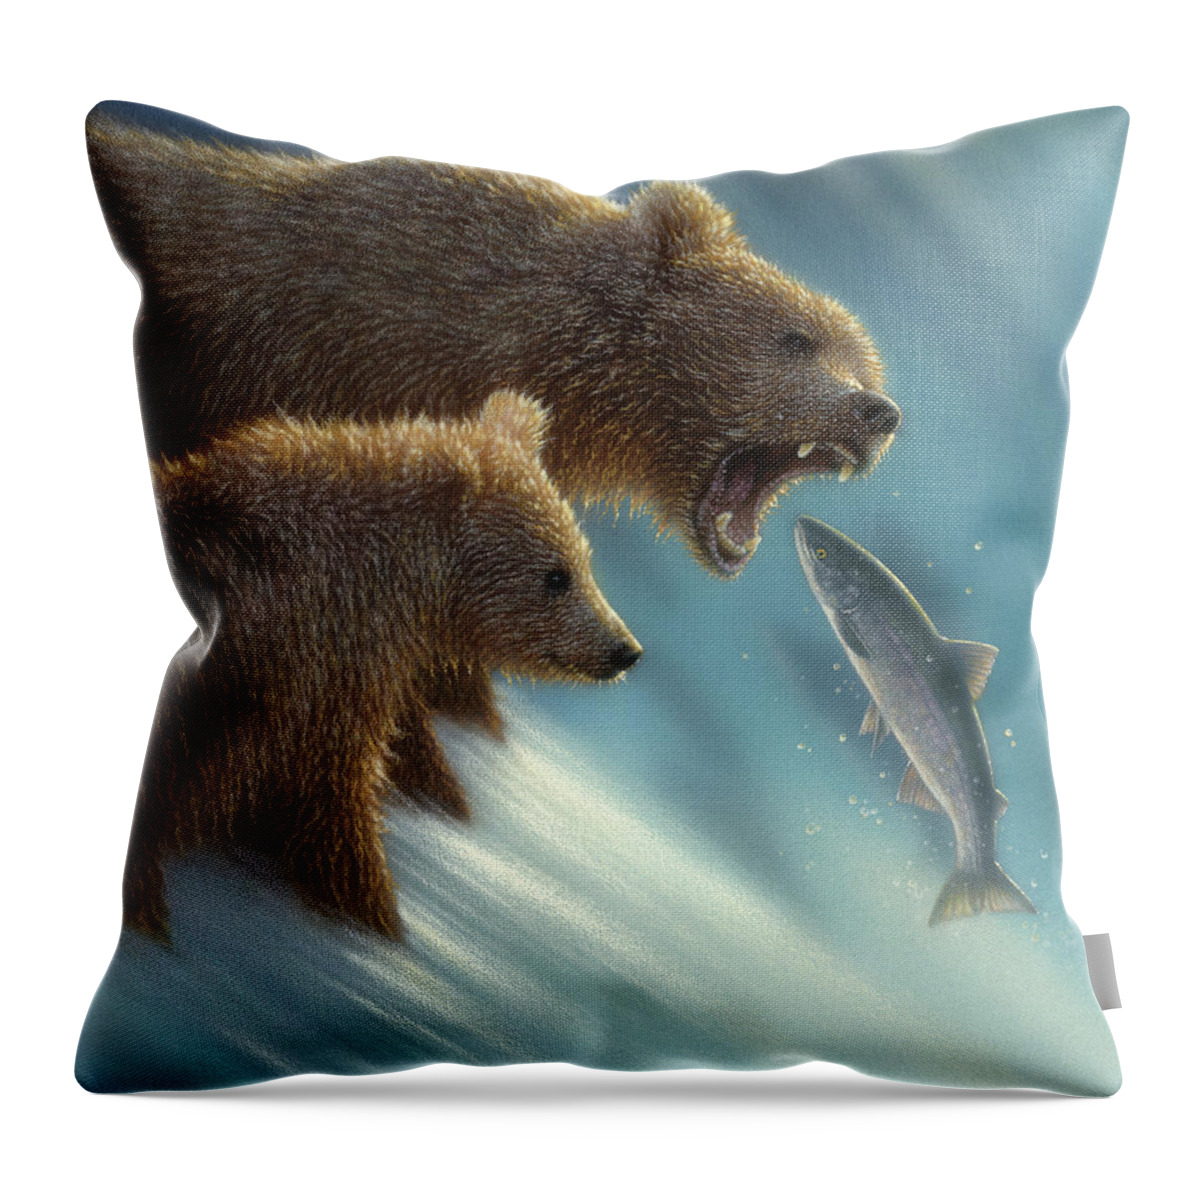 Bear Art Throw Pillow featuring the painting Brown Bears - Fishing Lesson by Collin Bogle